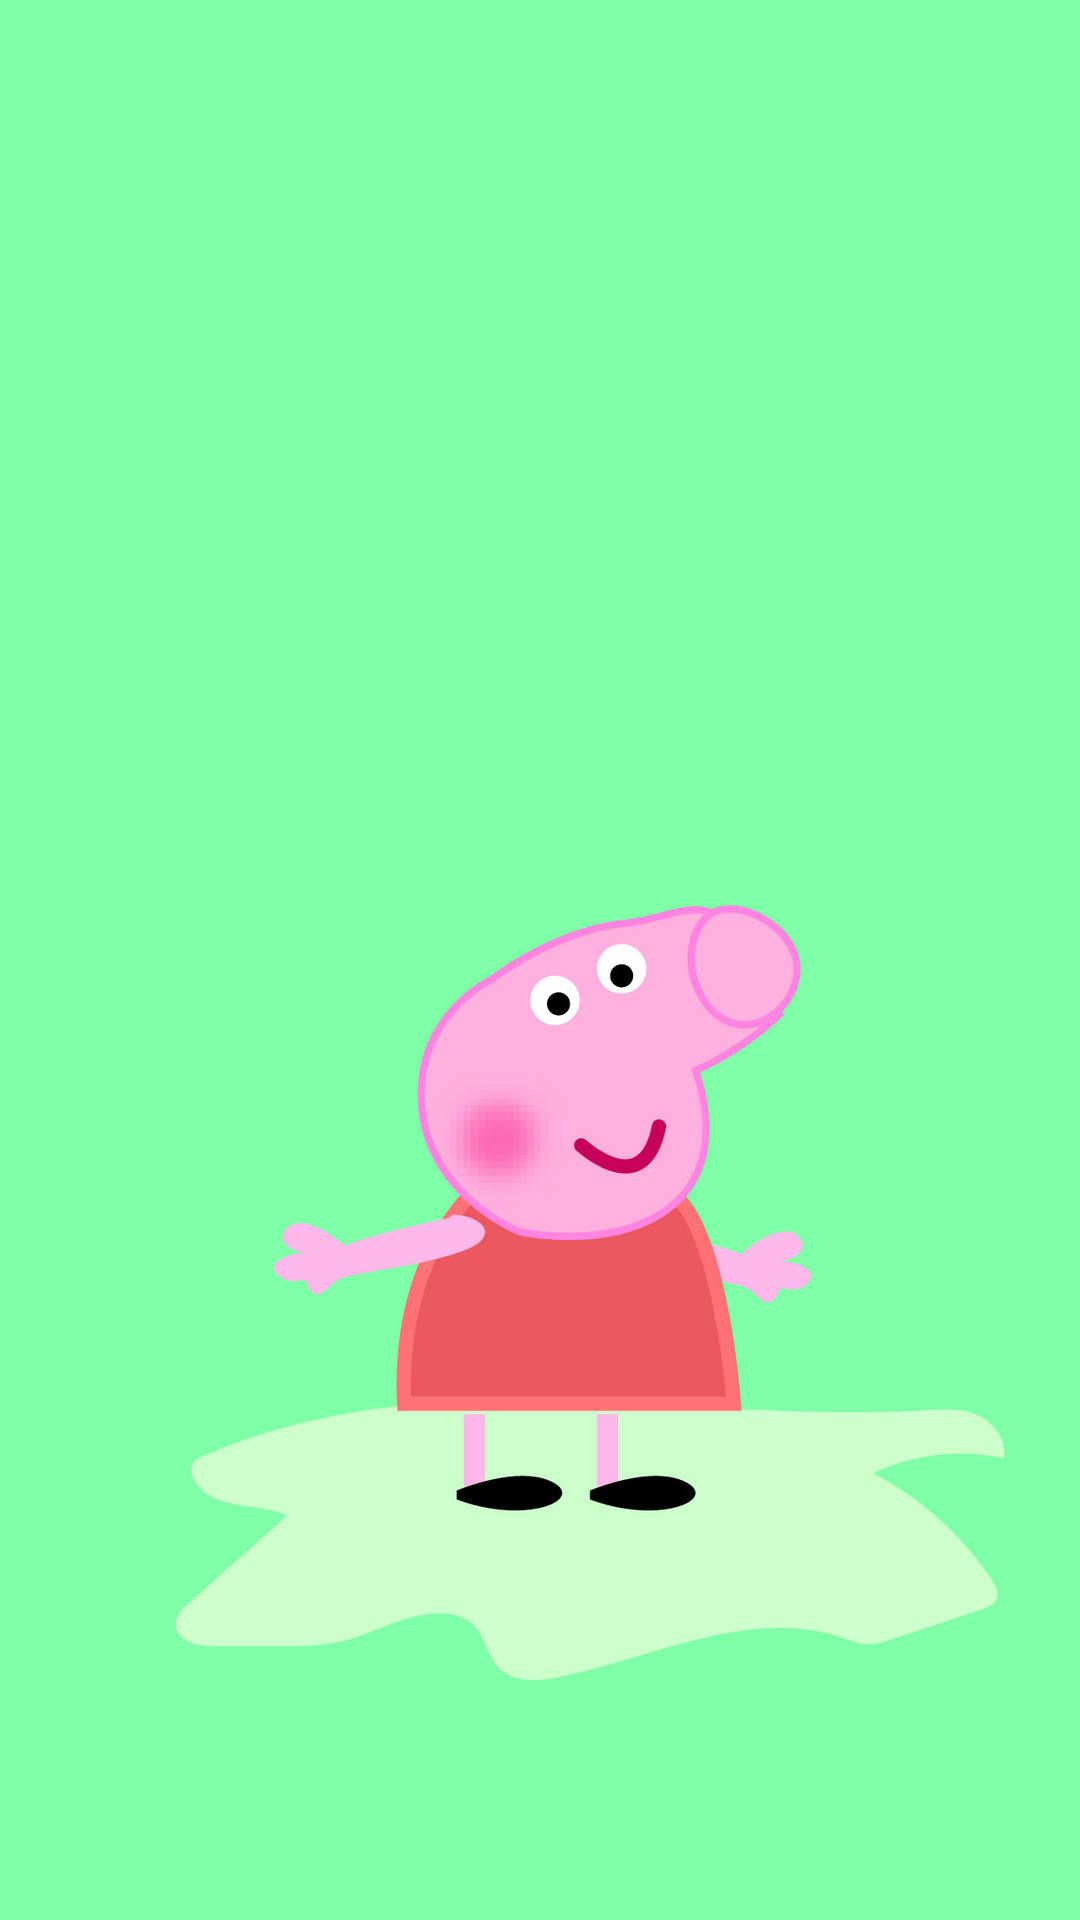 Download Peppa Pig iPhone No Ears Green Background Wallpaper